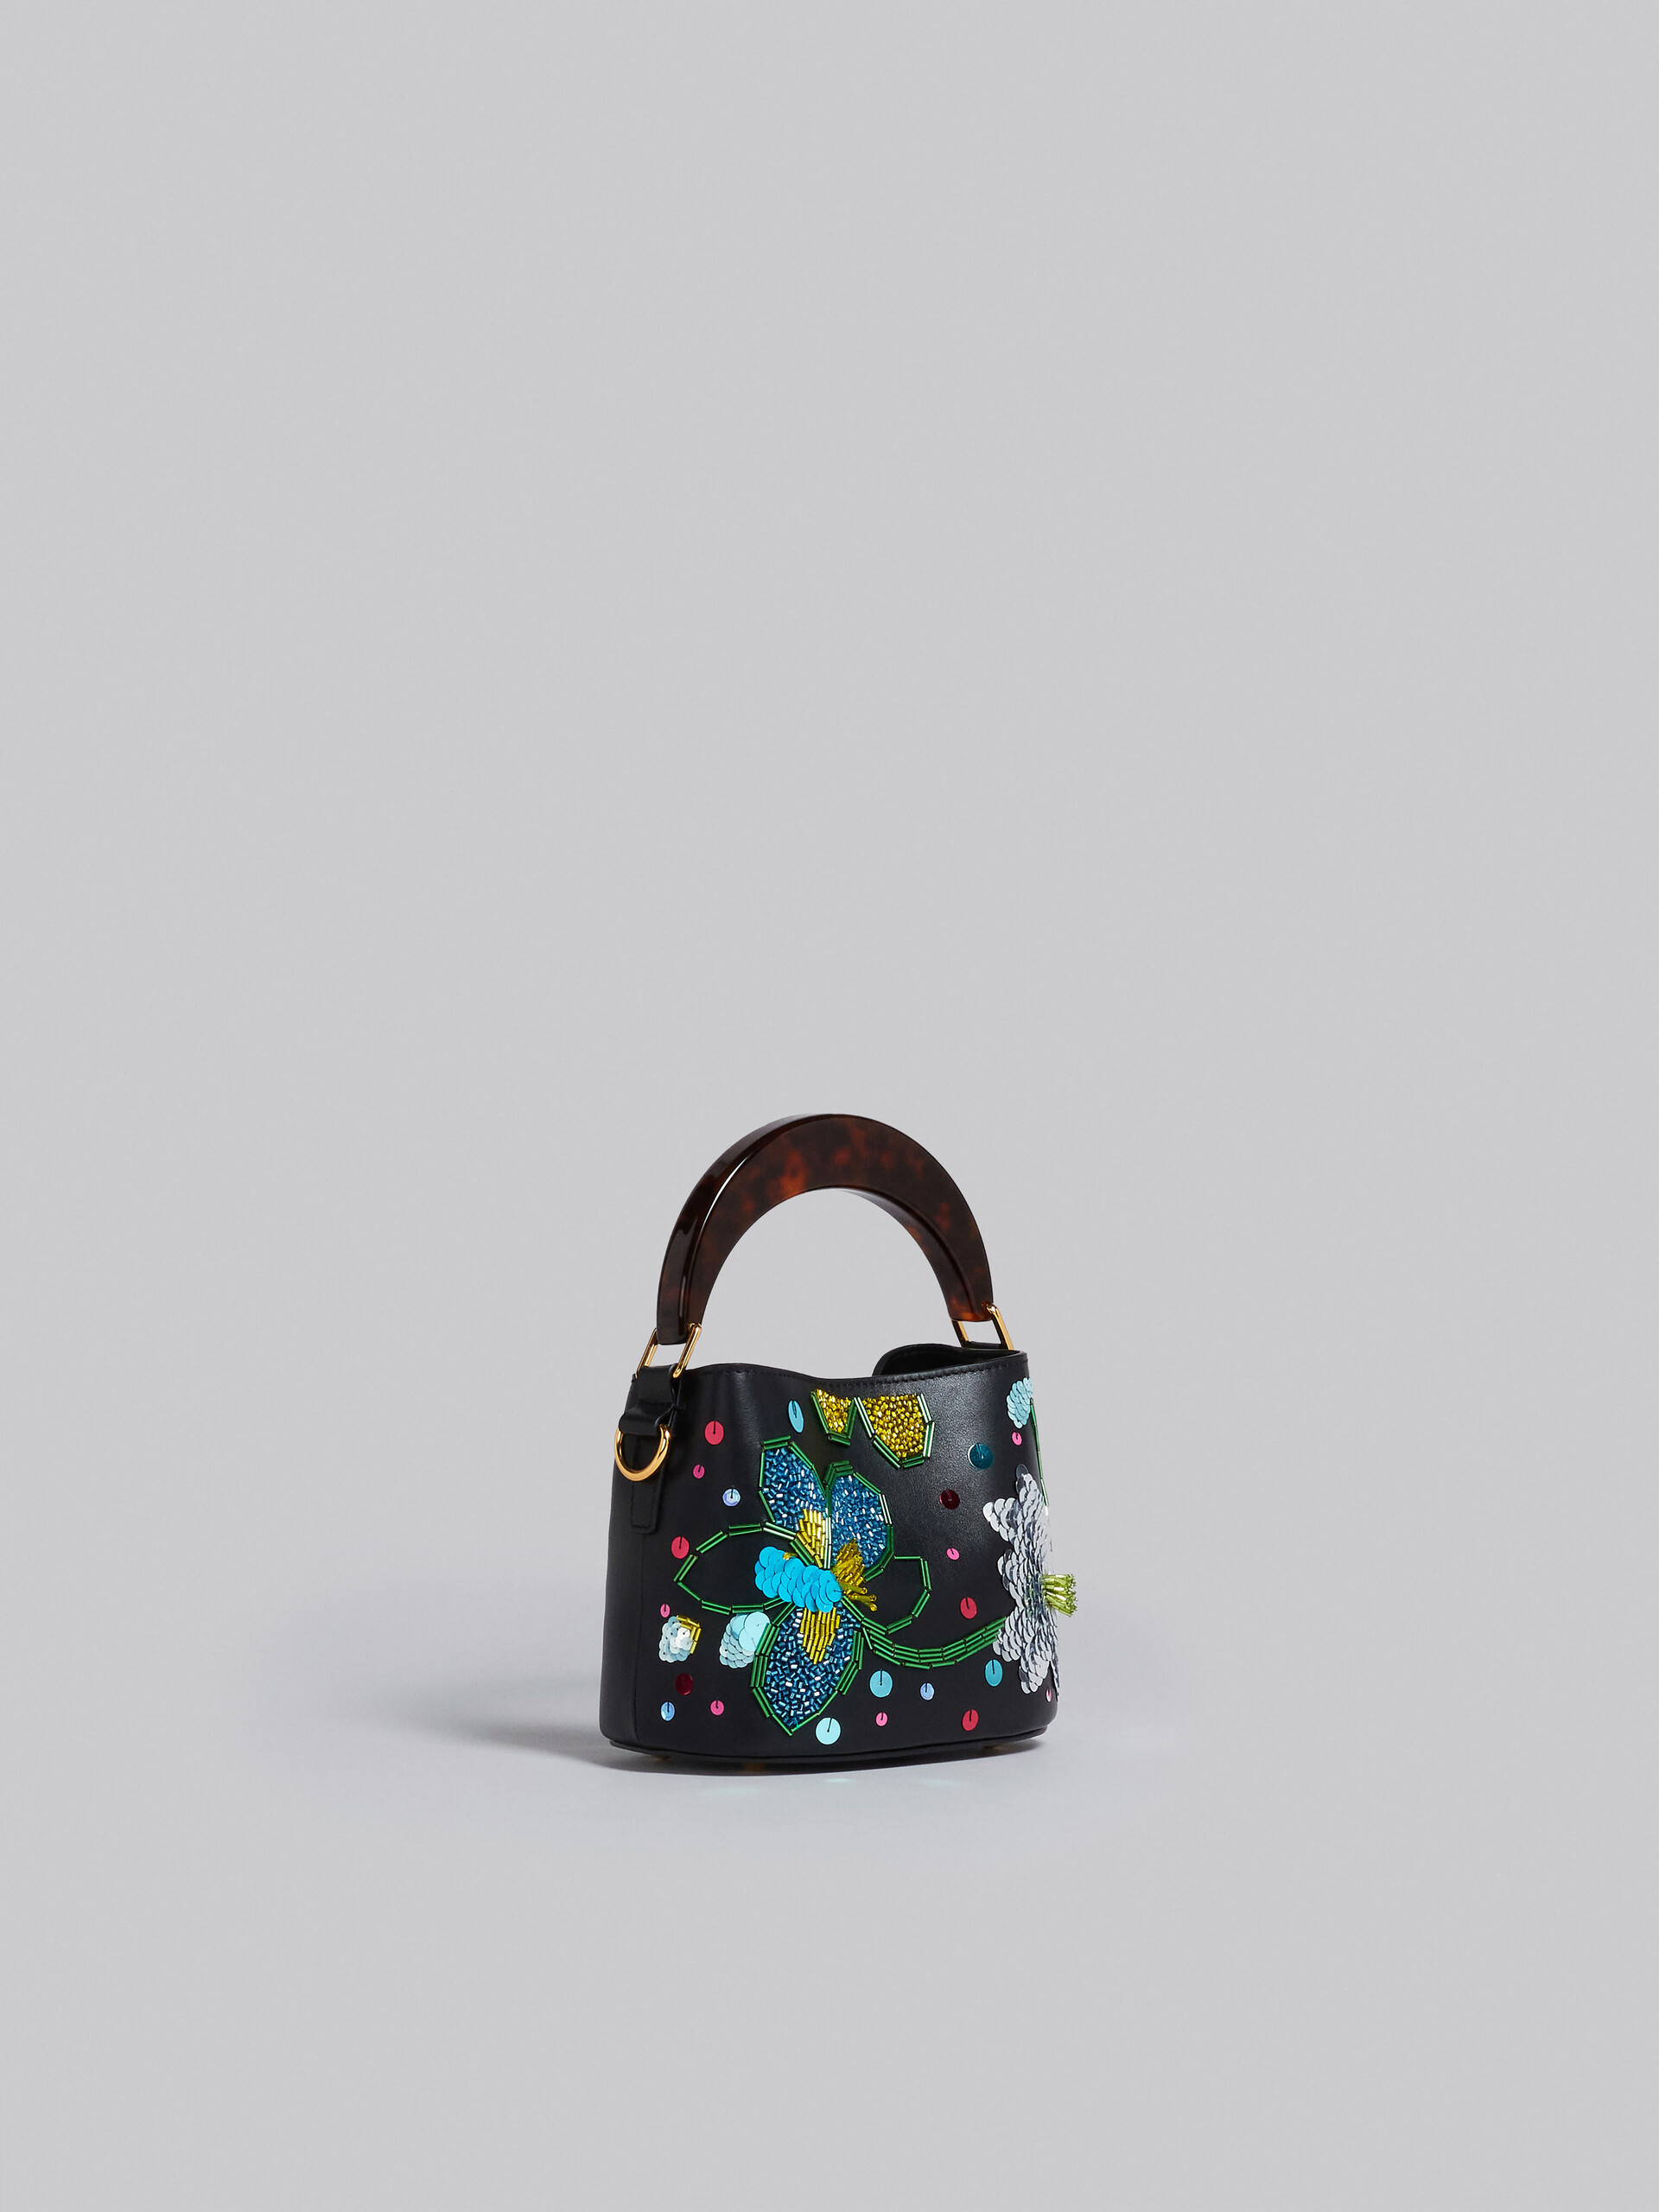 Venice Mini Bucket in embroidered black leather - Shoulder Bags - Image 5